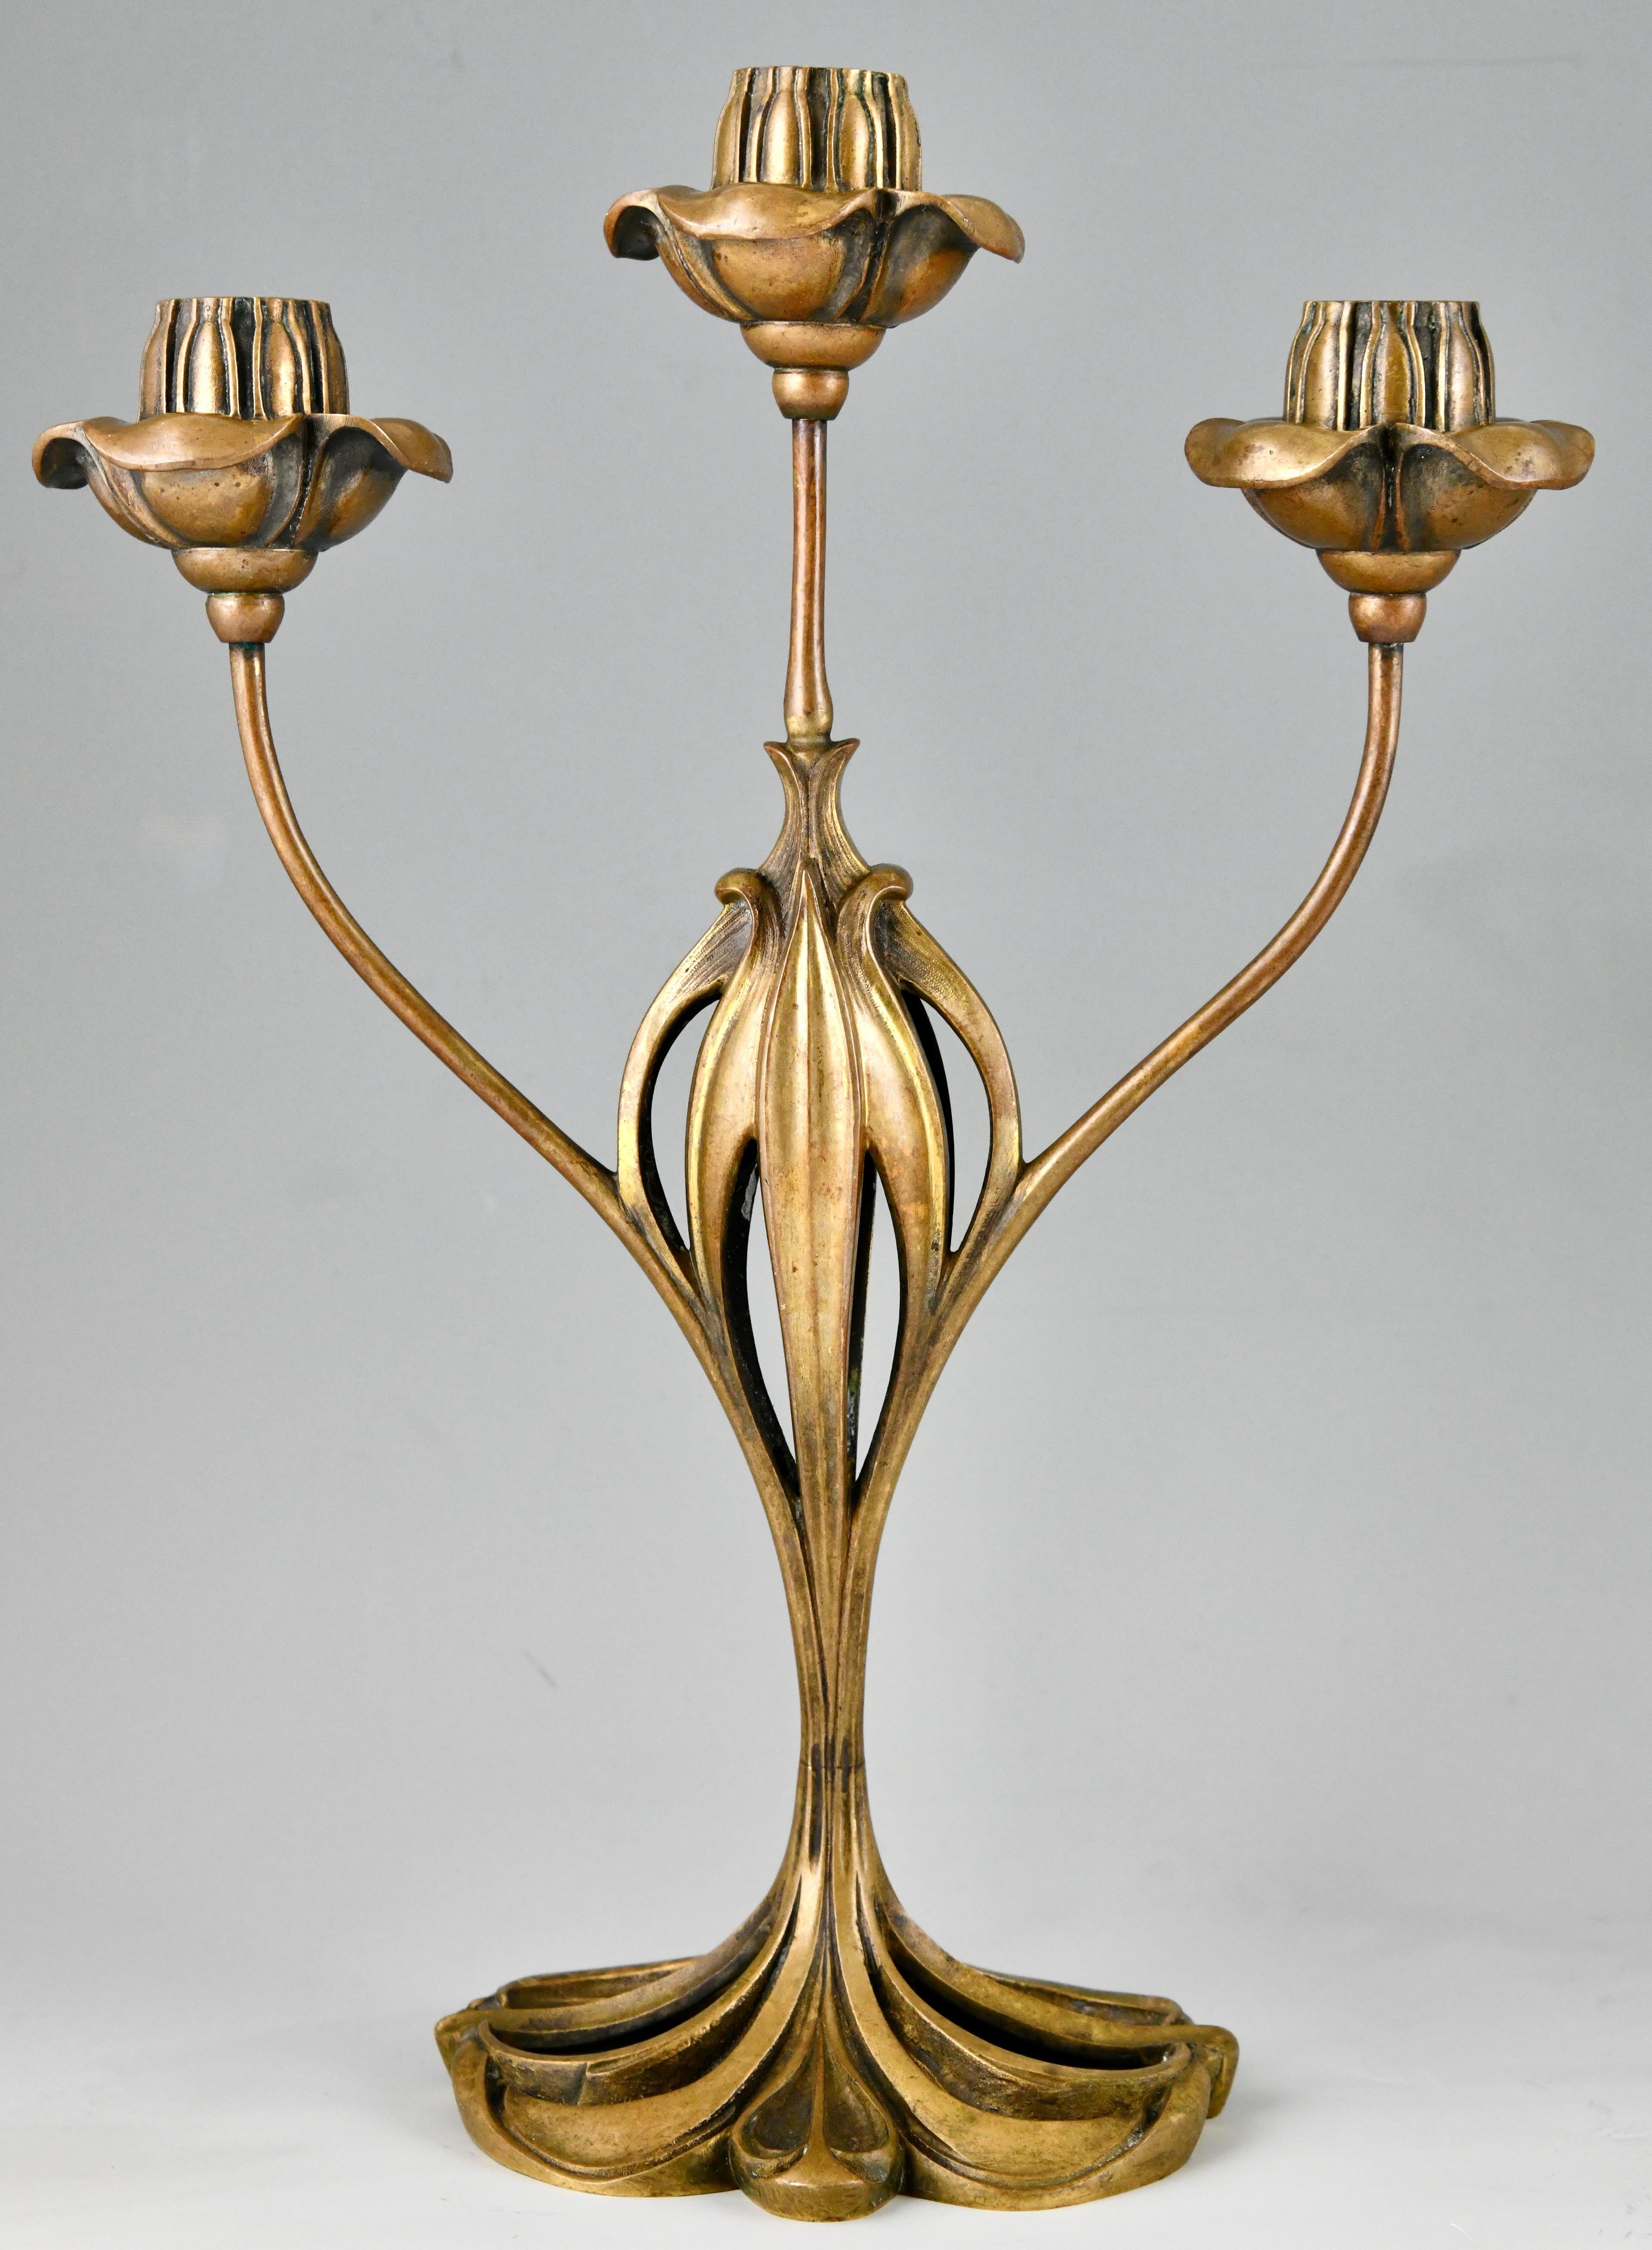 Early 20th Century Pair of bronze Art Nouveau candelabra with floral design by Georges de Feure For Sale